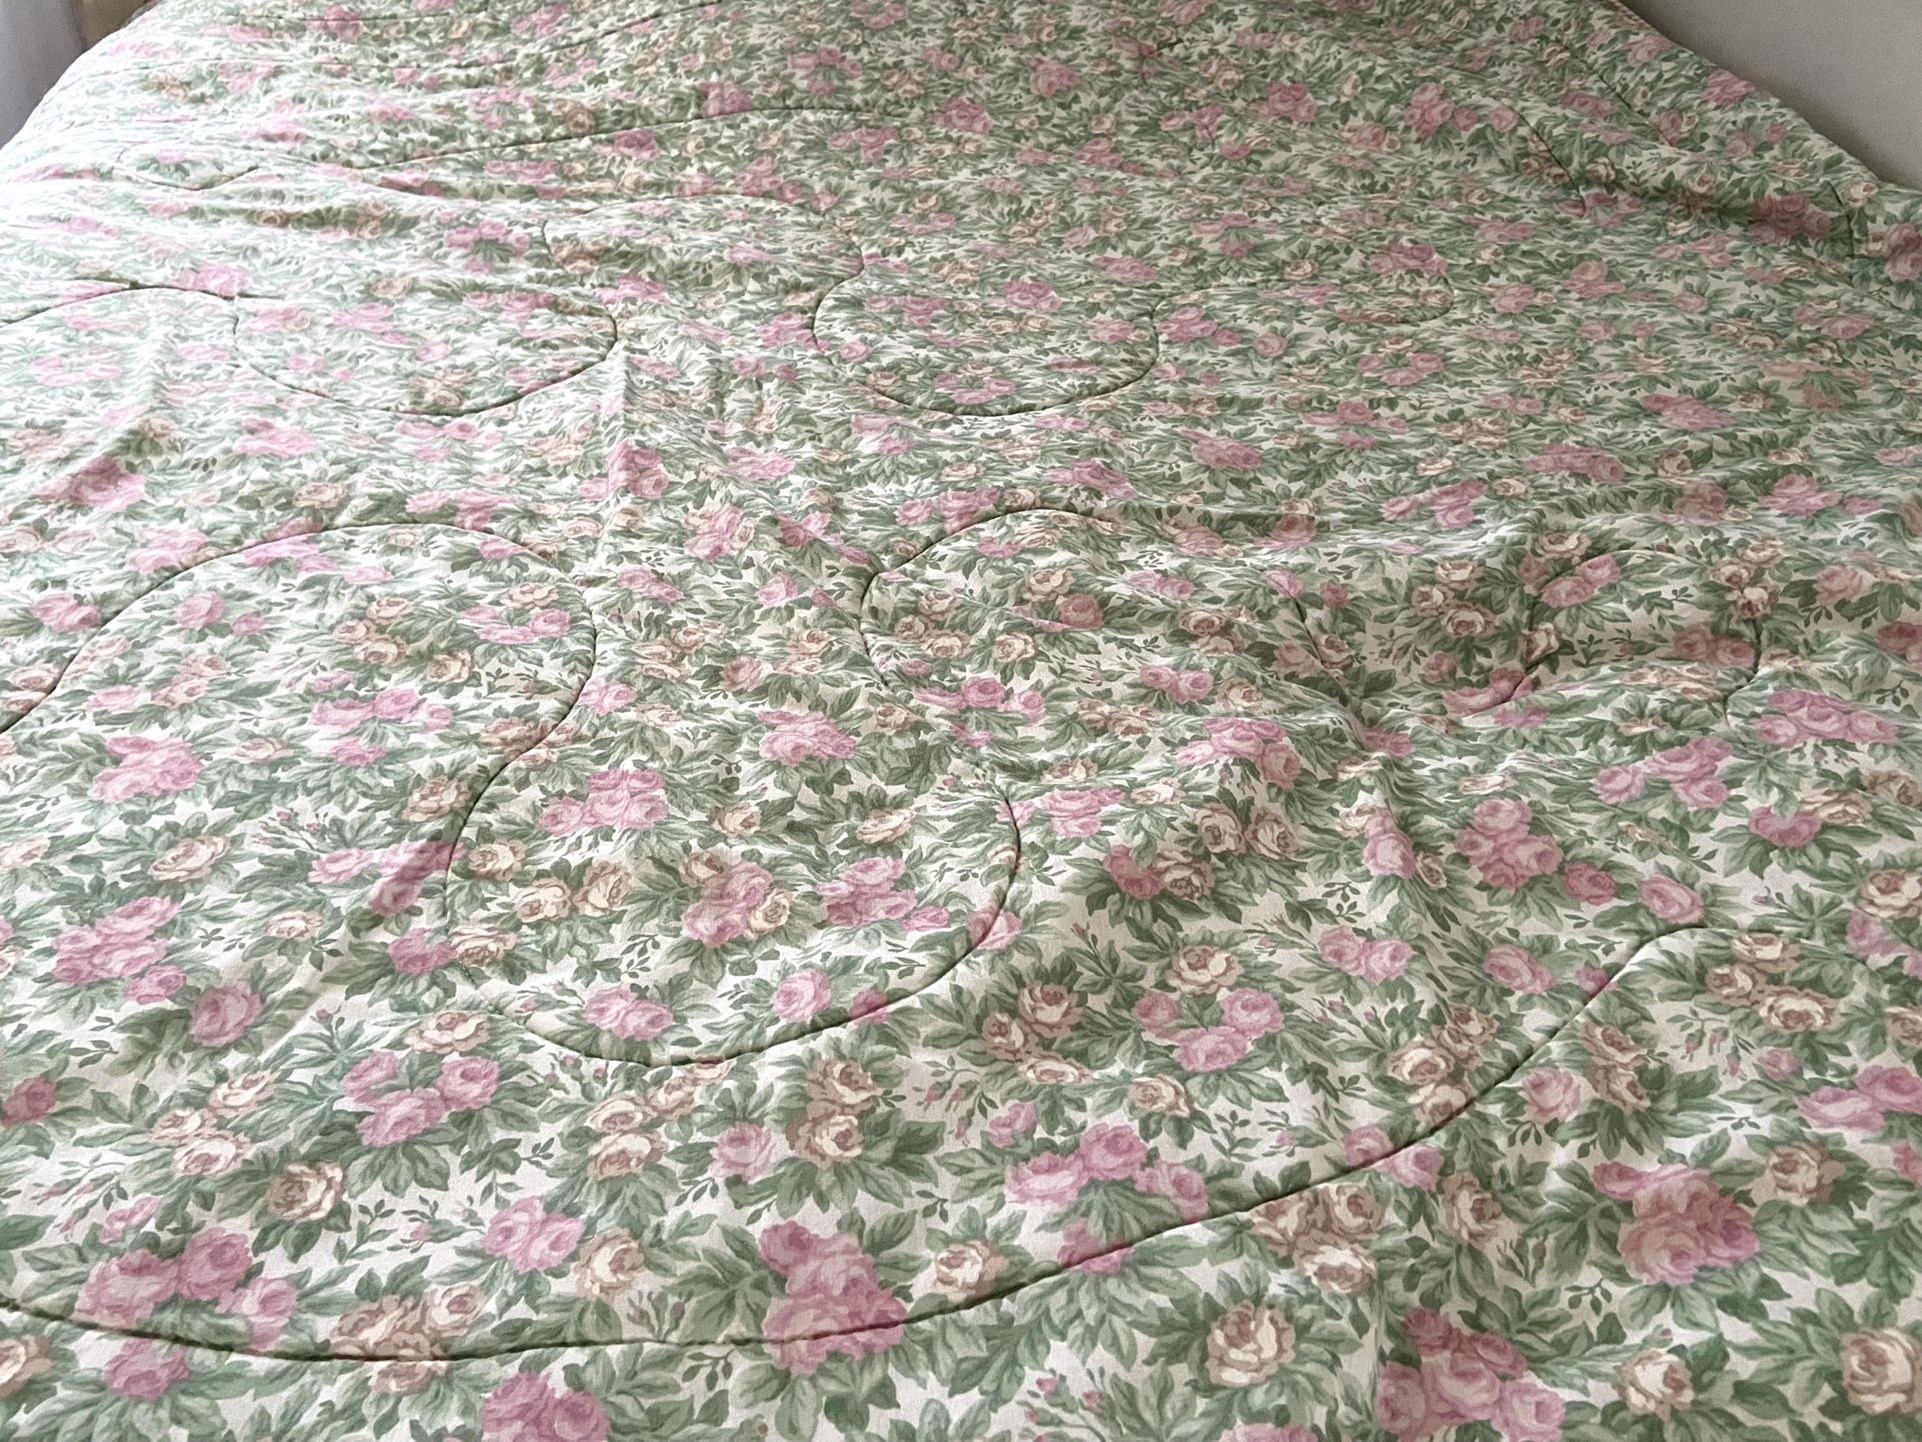 Cottage Core Farmhouse Comforter Bedspread Reversible Pink Green Roses 91”x95”